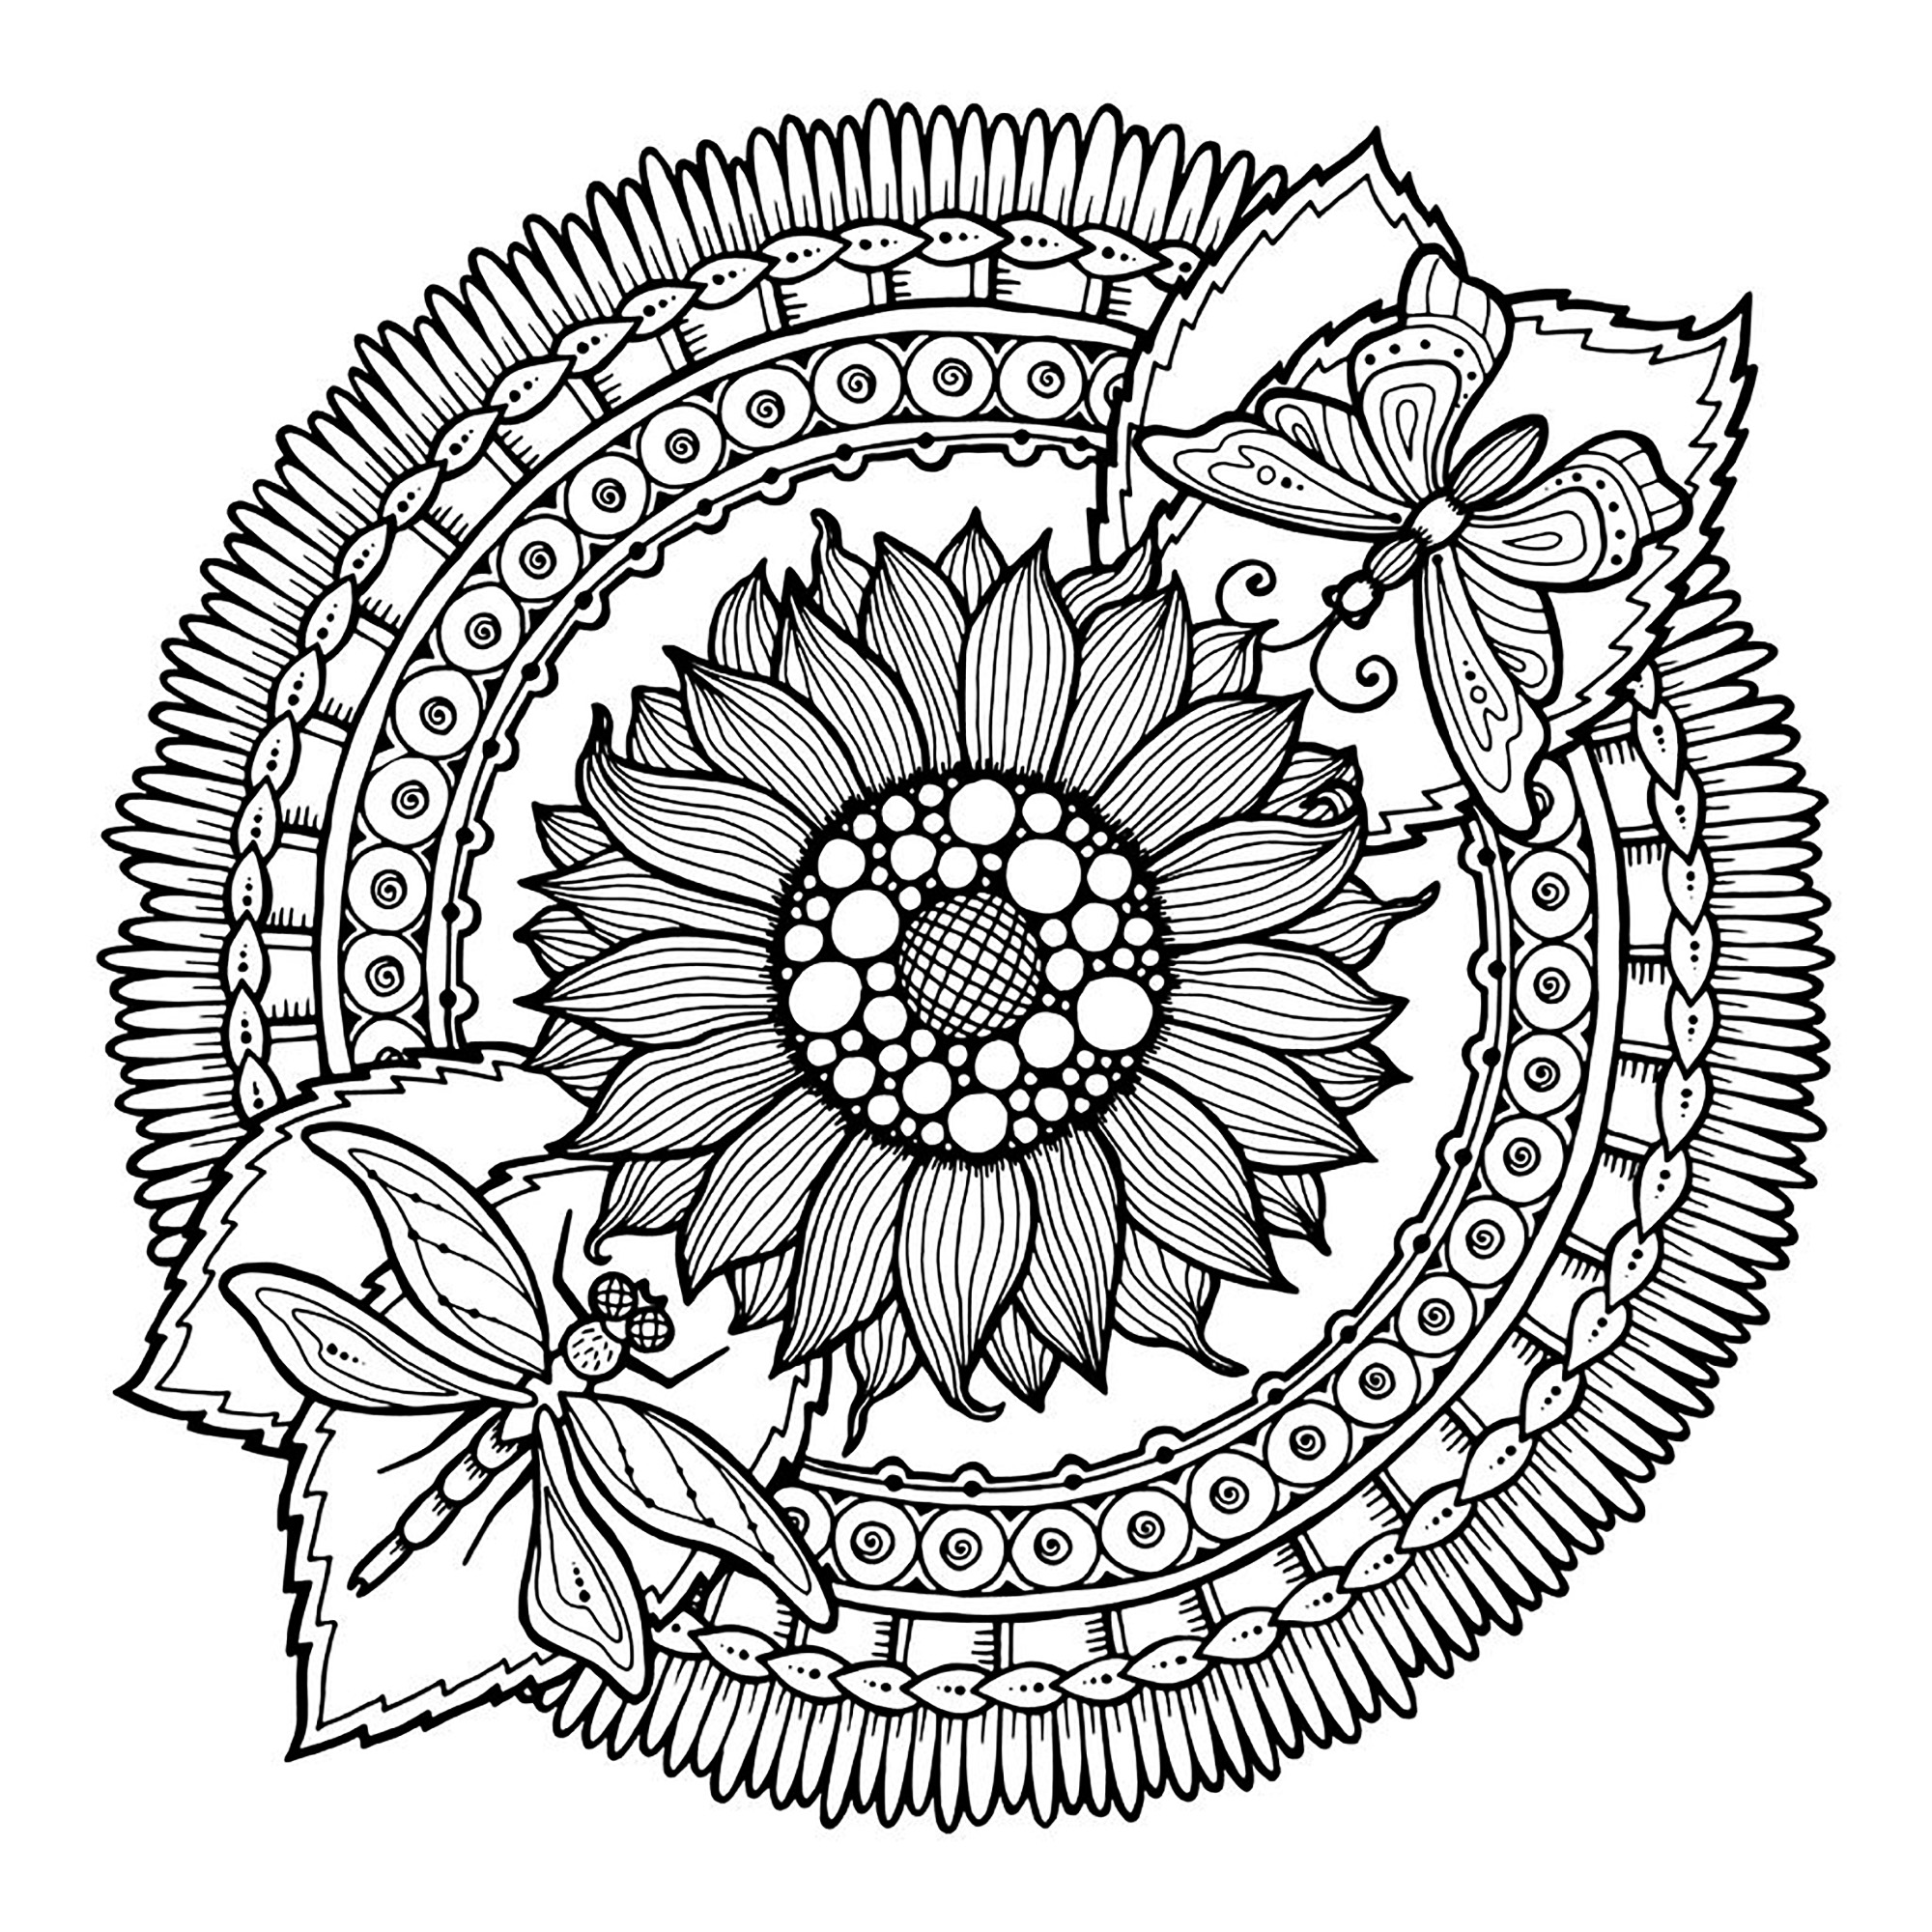 Mandala dragonfly and flowers - Mandalas Adult Coloring Pages